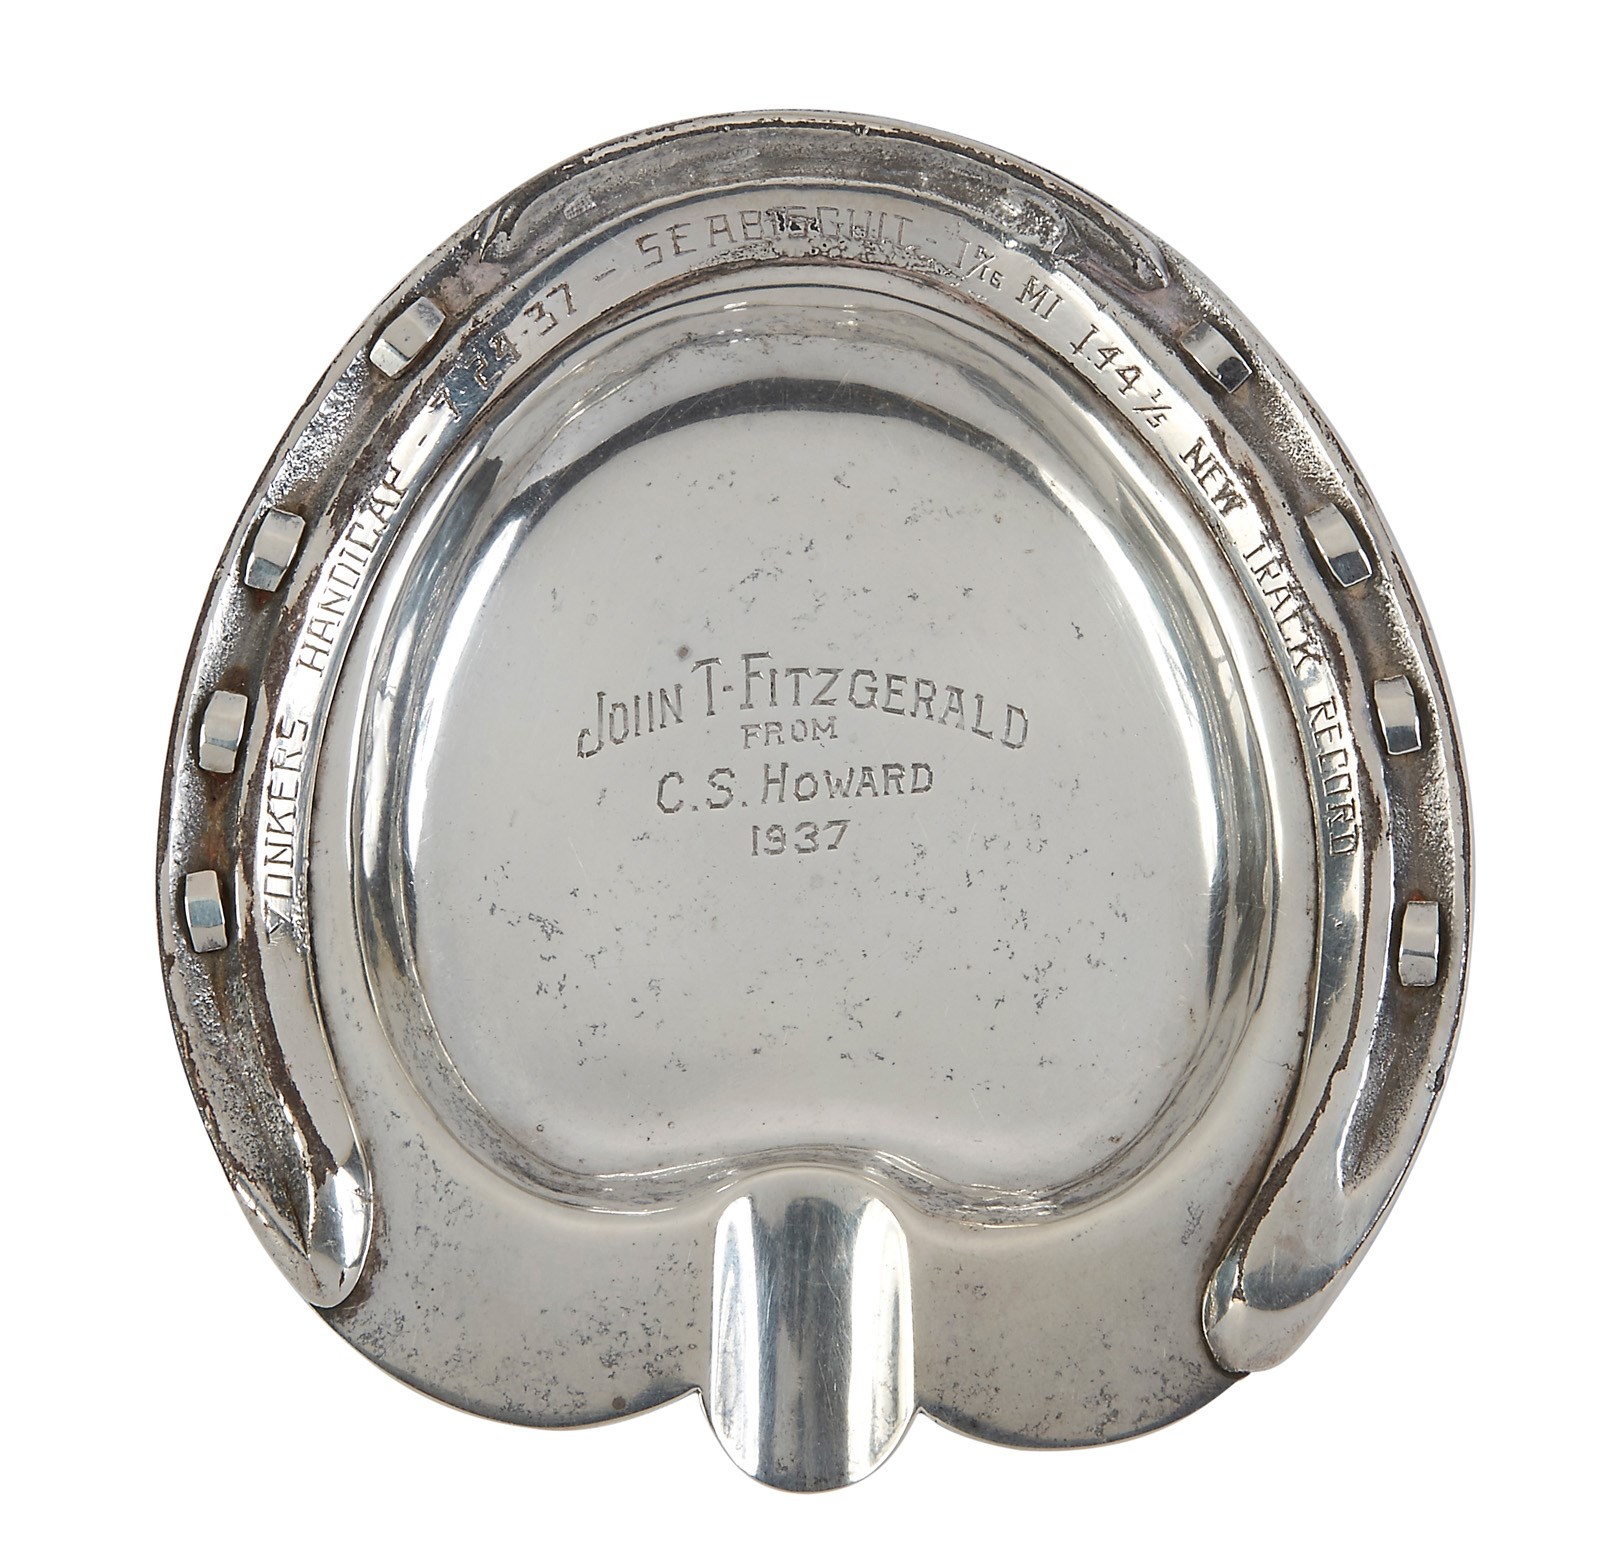 Horse Racing - 1937 Seabiscuit Race-Worn Horseshoe Silver Ashtray Gifted by C.S. Howard